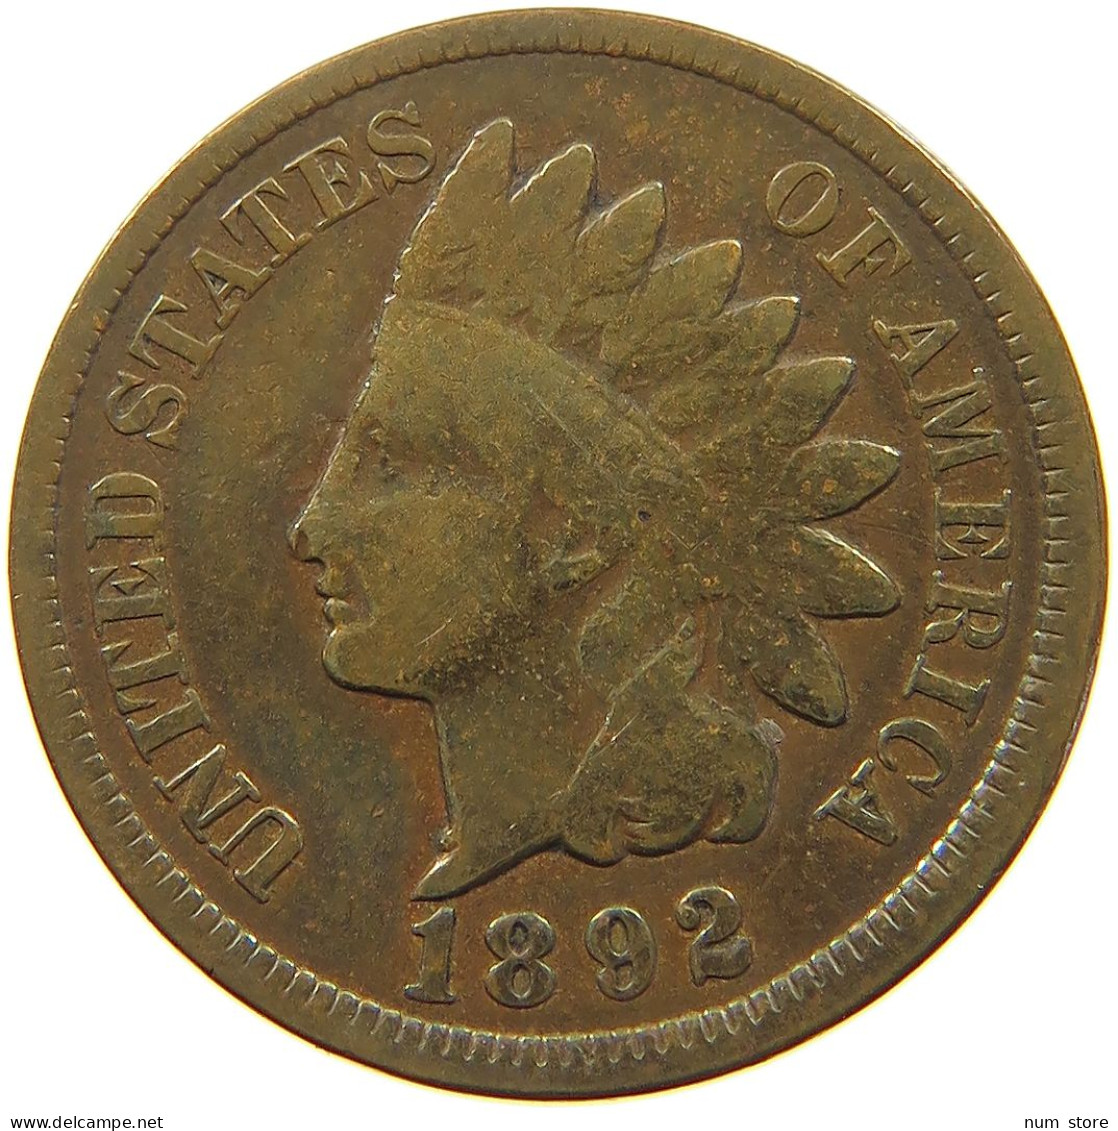 UNITED STATES OF AMERICA CENT 1892 INDIAN HEAD #a036 0679 - 1859-1909: Indian Head